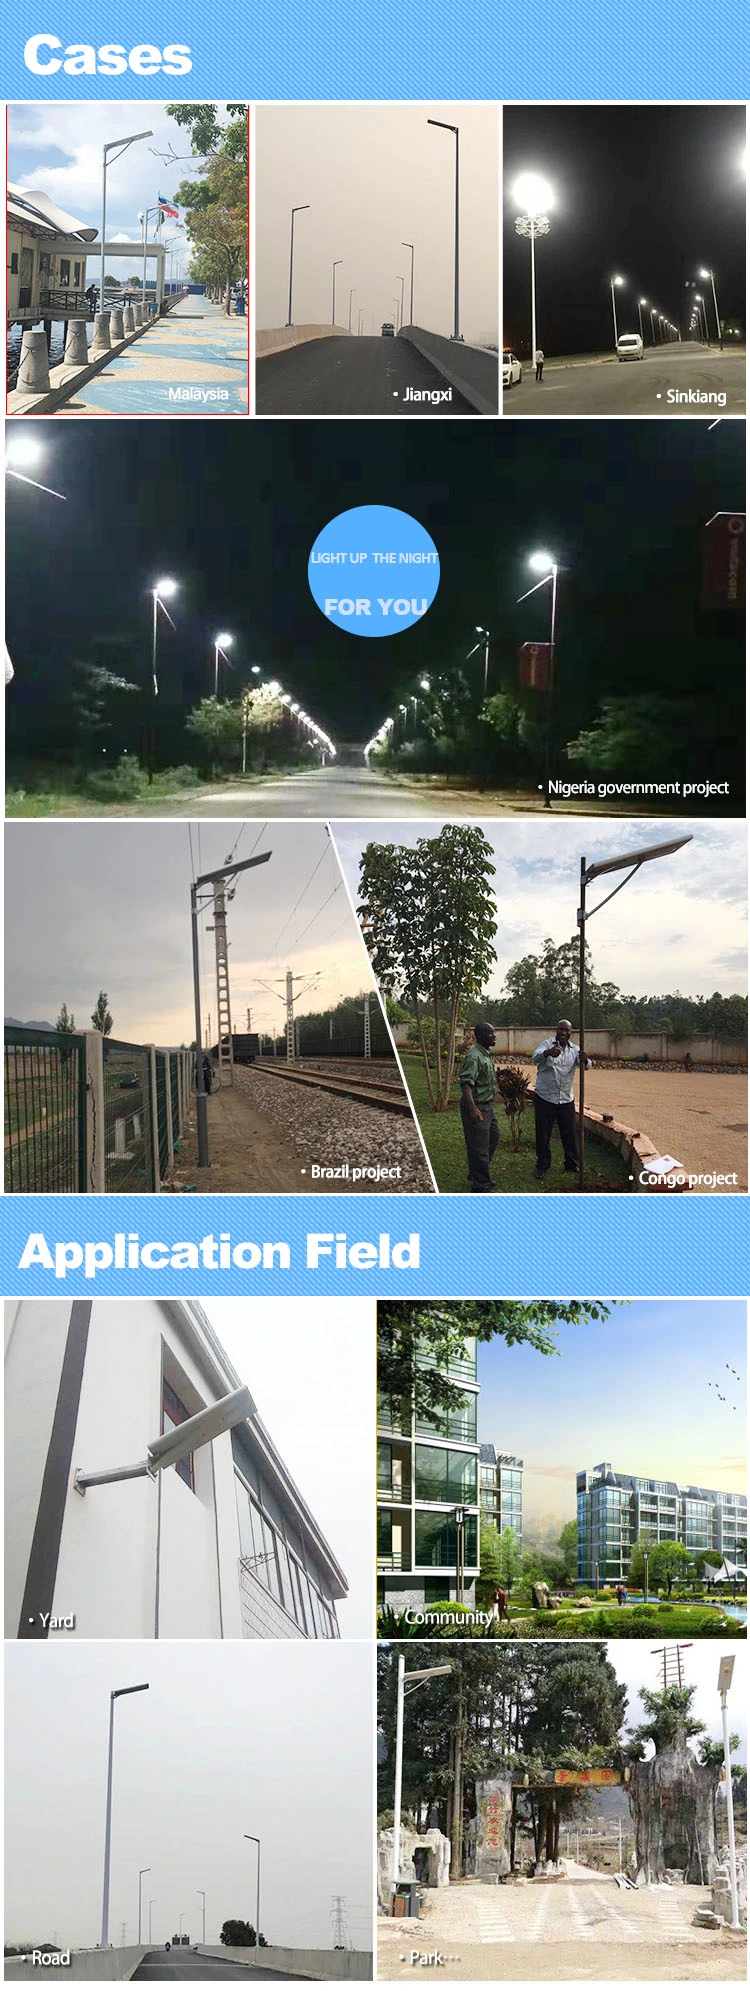 Remote Monitoring Solar Street Light for Africa